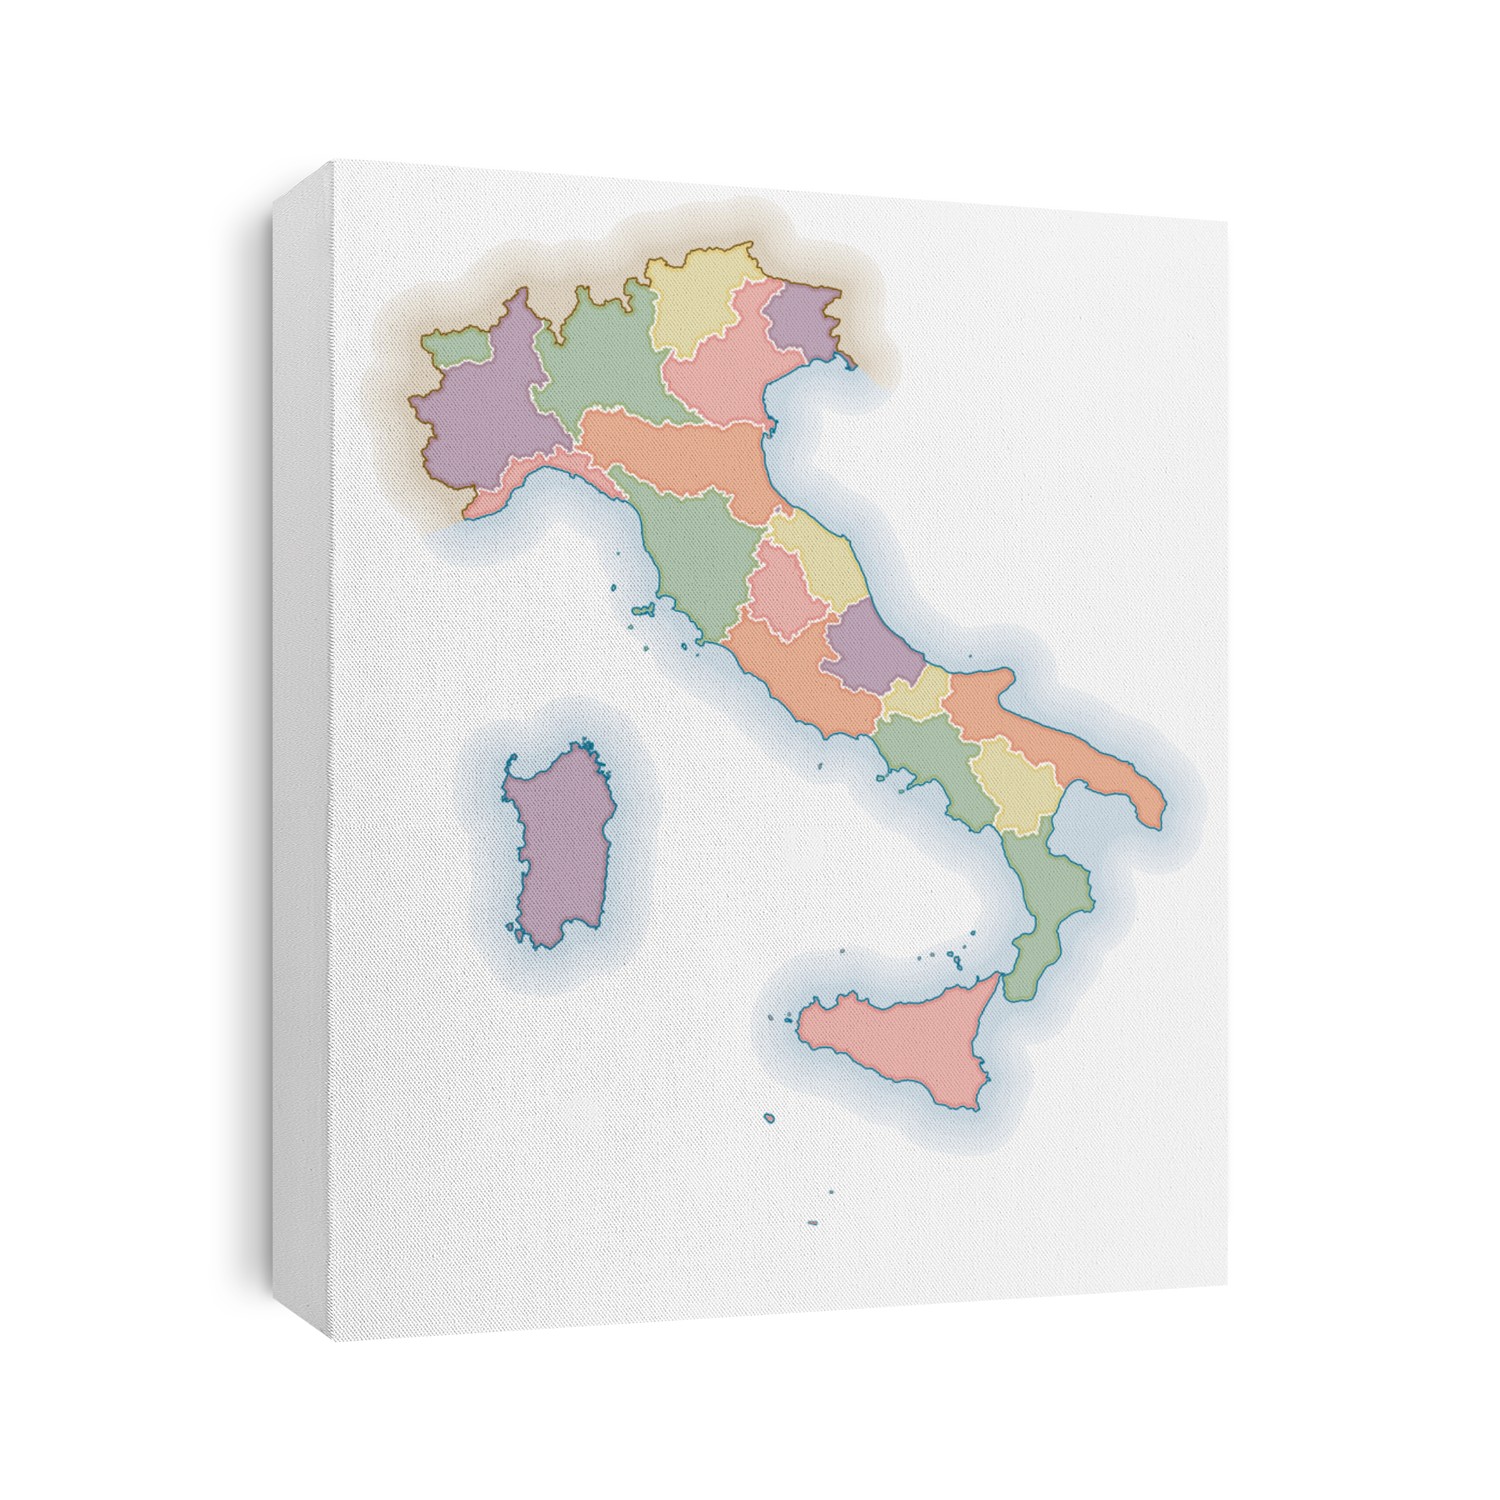 Map of Italy with region boundaries. Political map